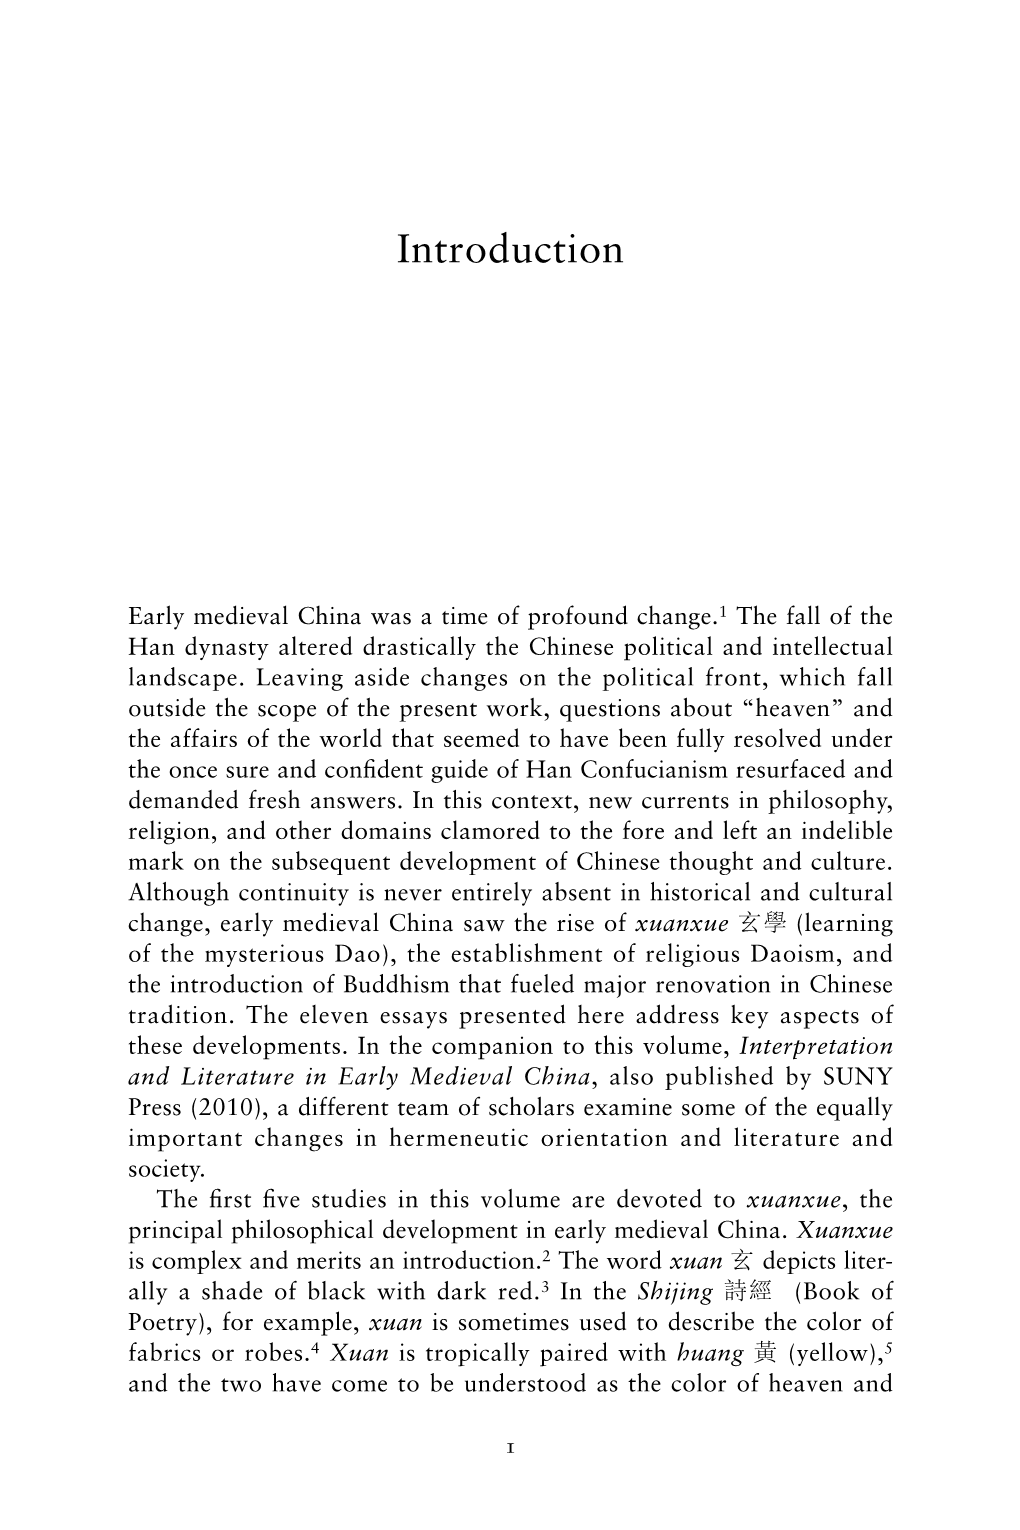 Philosophy and Religion in Early Medieval China Was Preoccupied with Practical Concerns